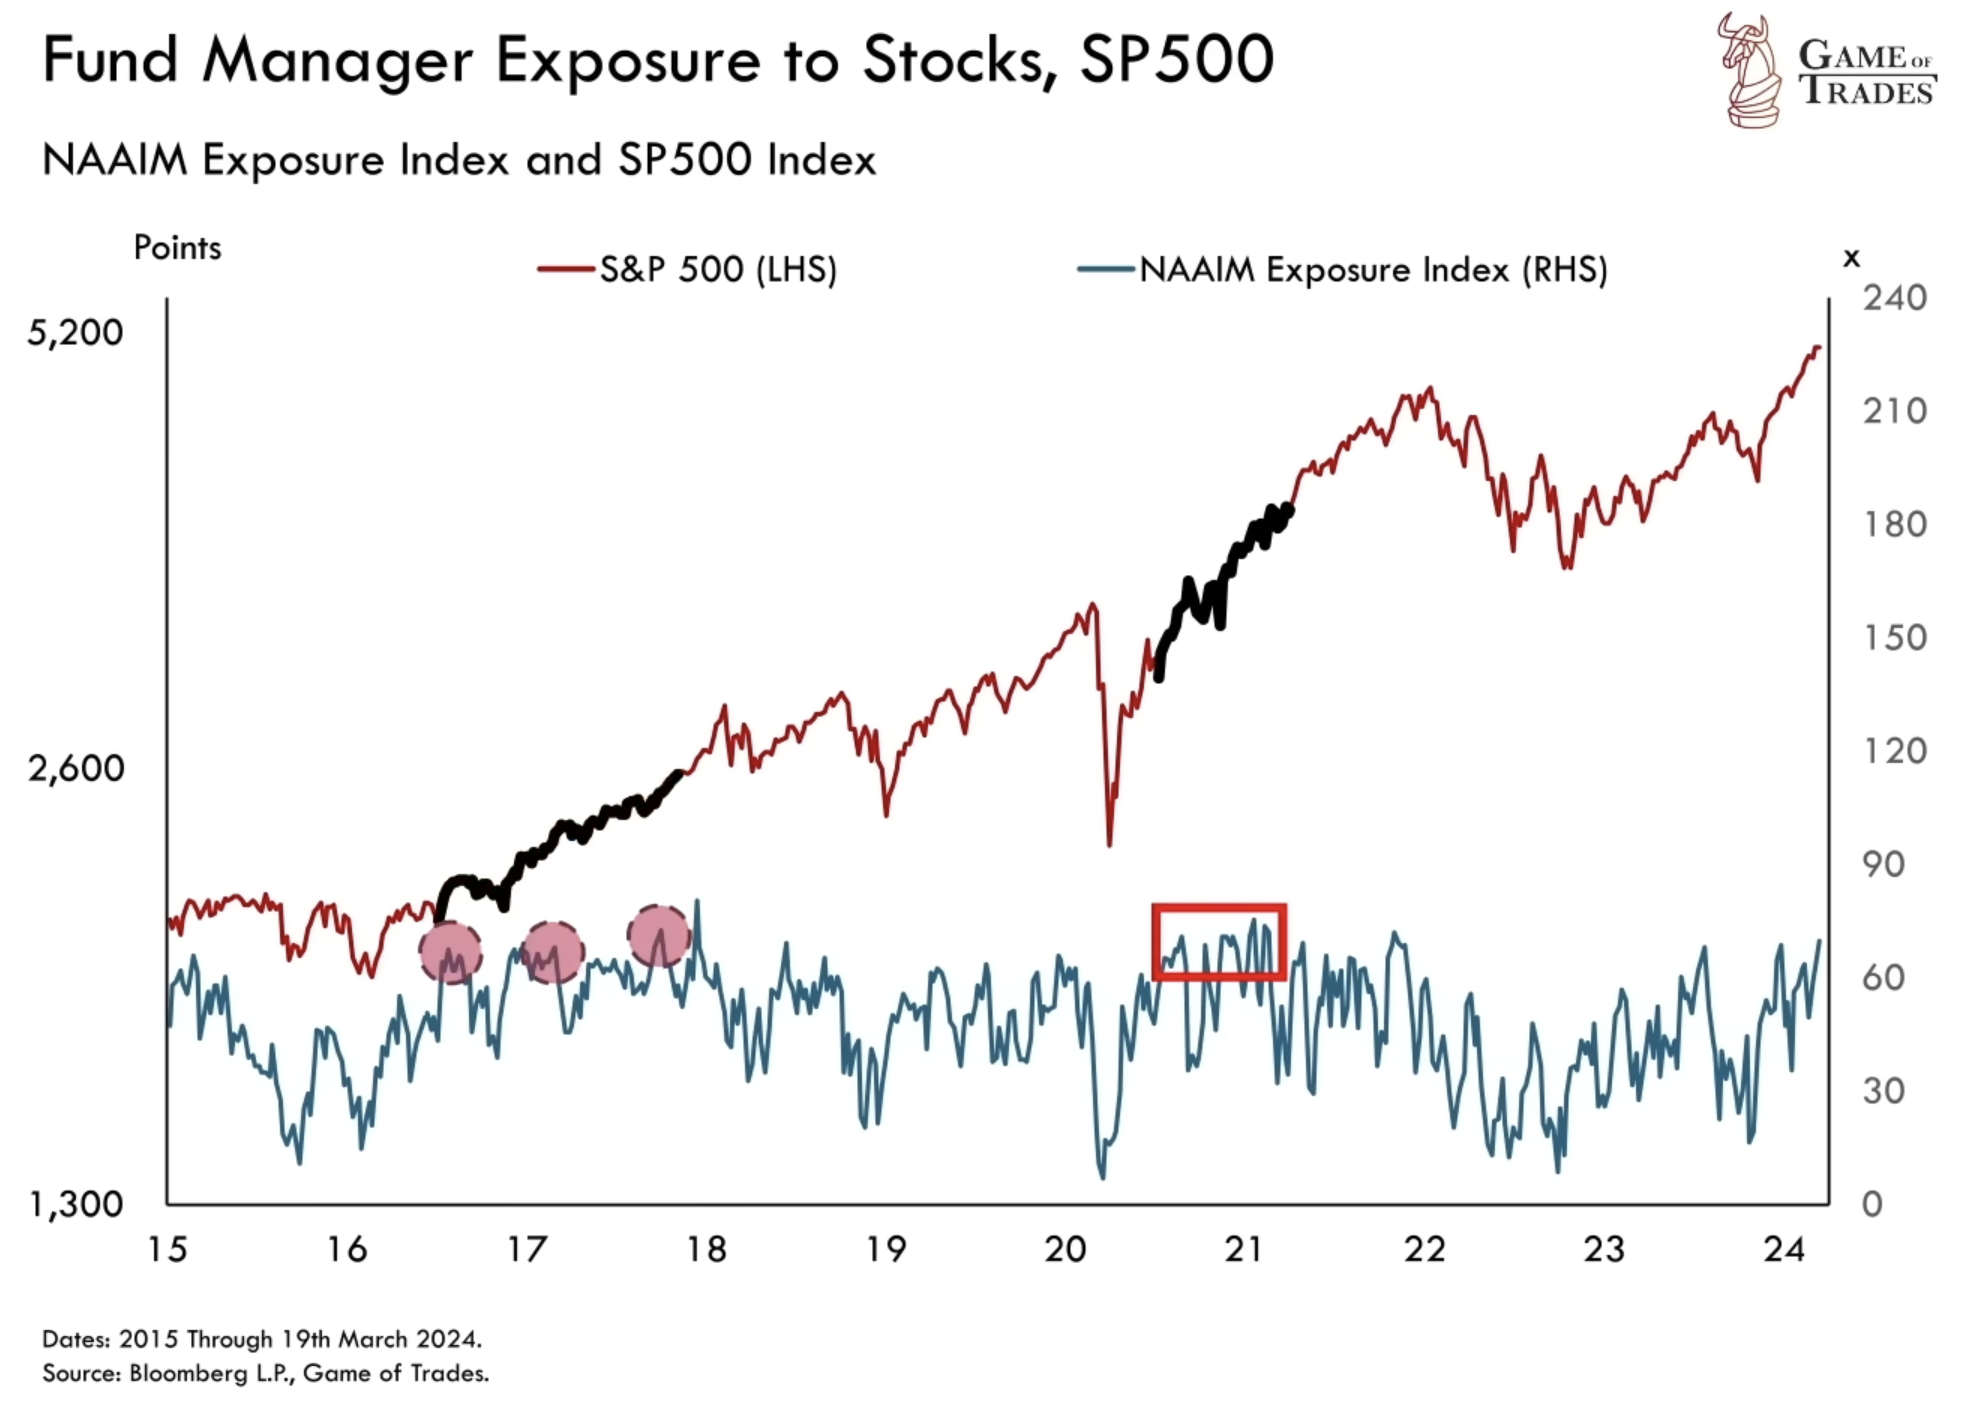 Fund manager exposure to stocks 